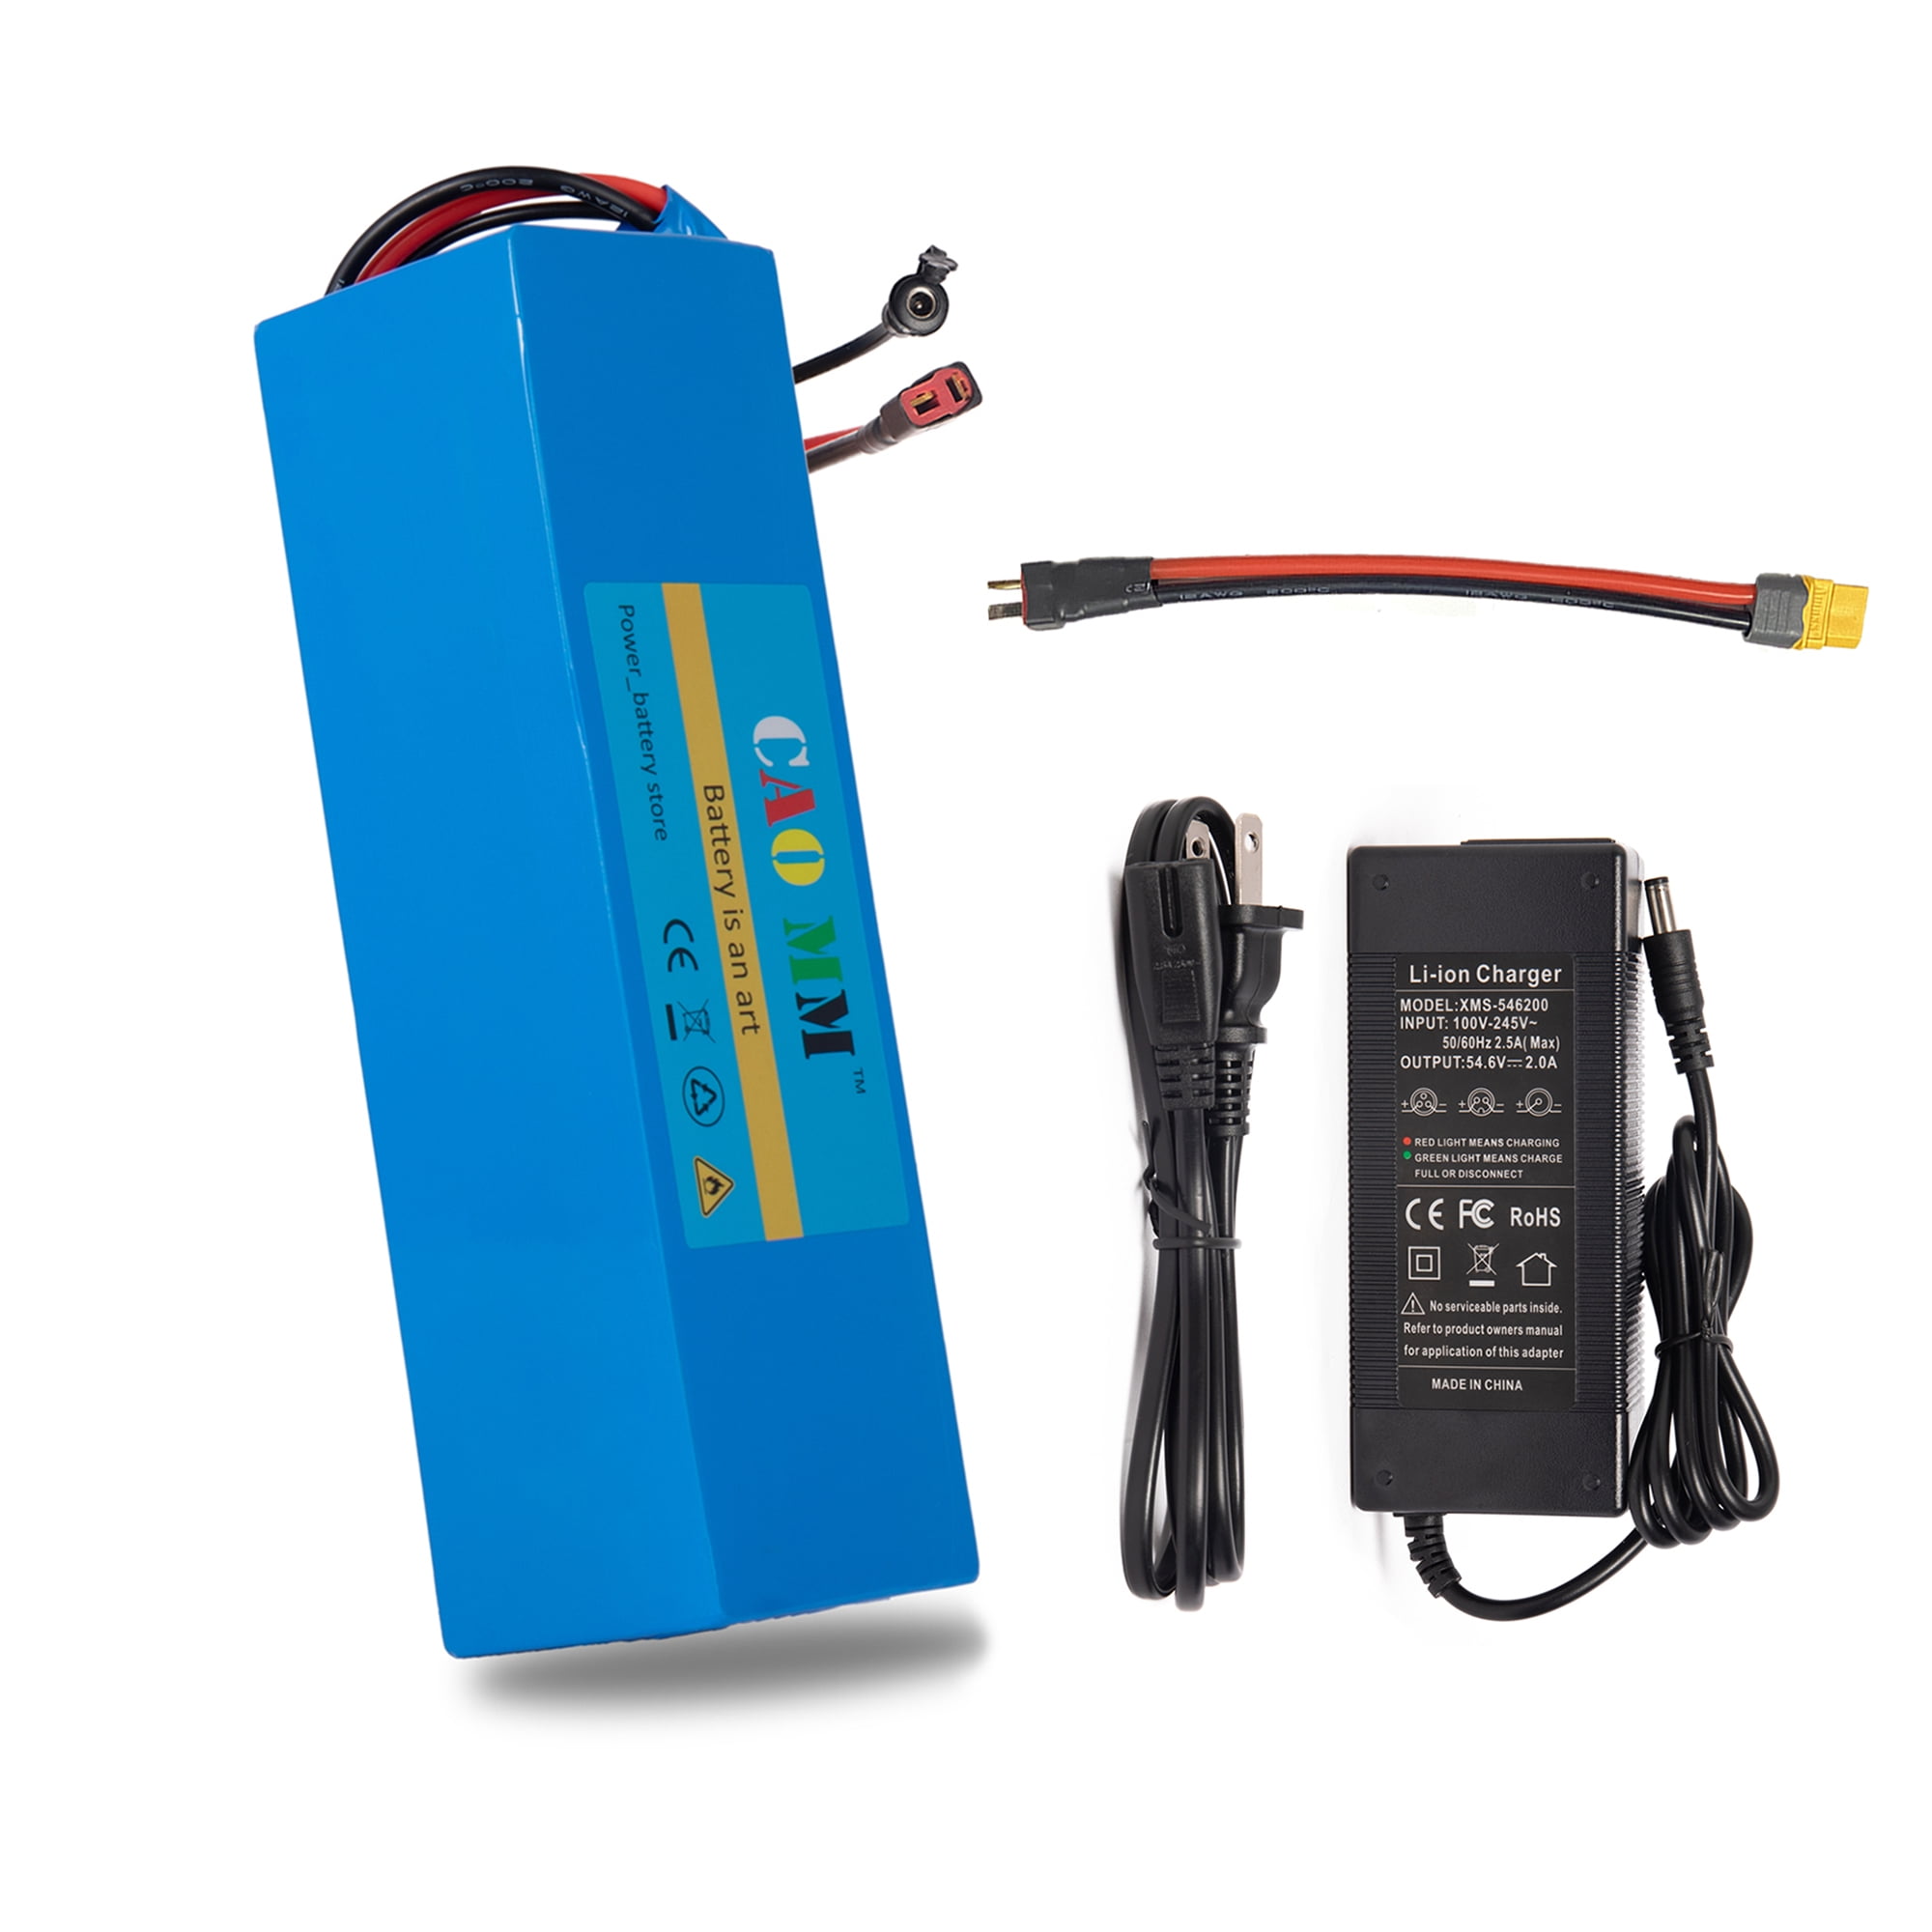 Lifepo4 48v 20ah battery with RS485 for E-bike, E-scooter, Power